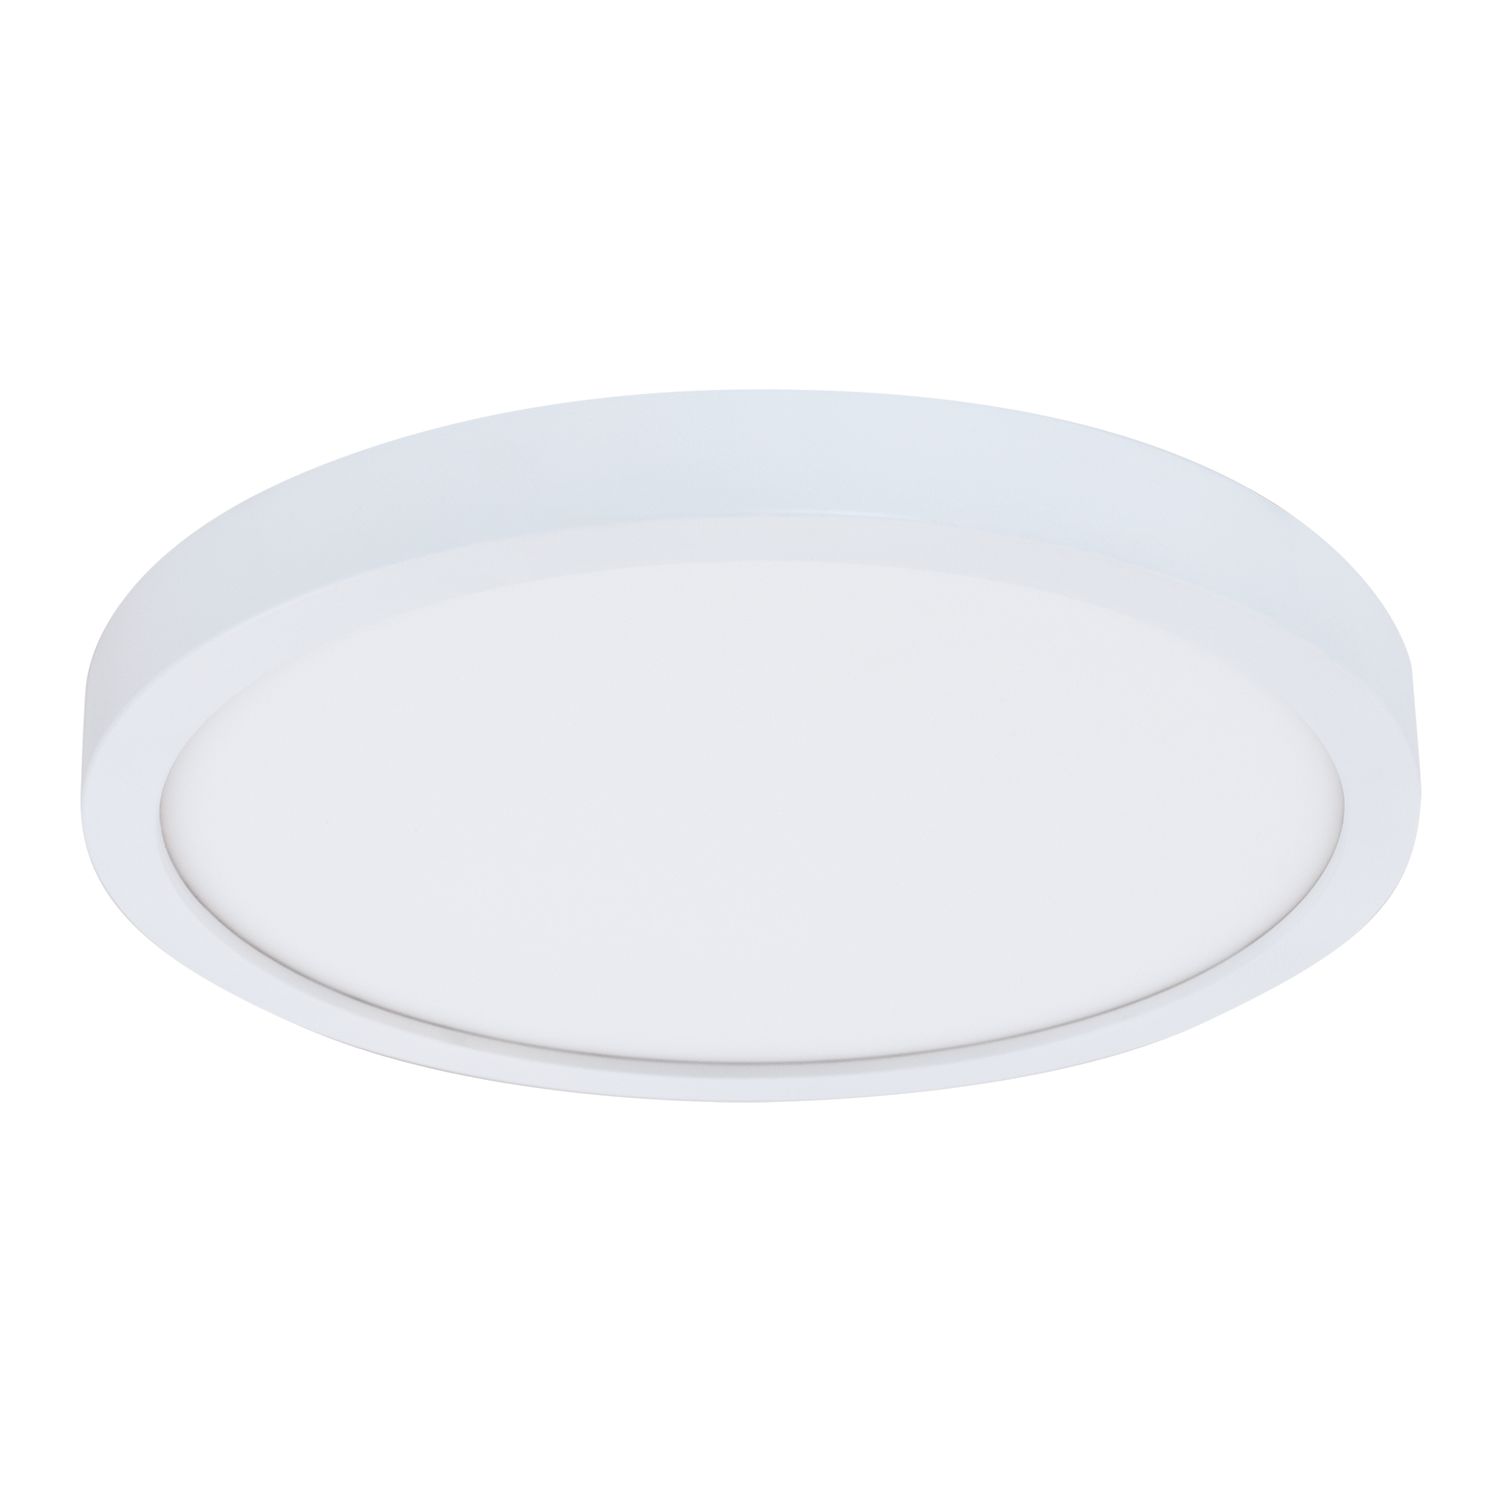 14" SMD ROUND, PAINTABLE WHITE TRIM OVER